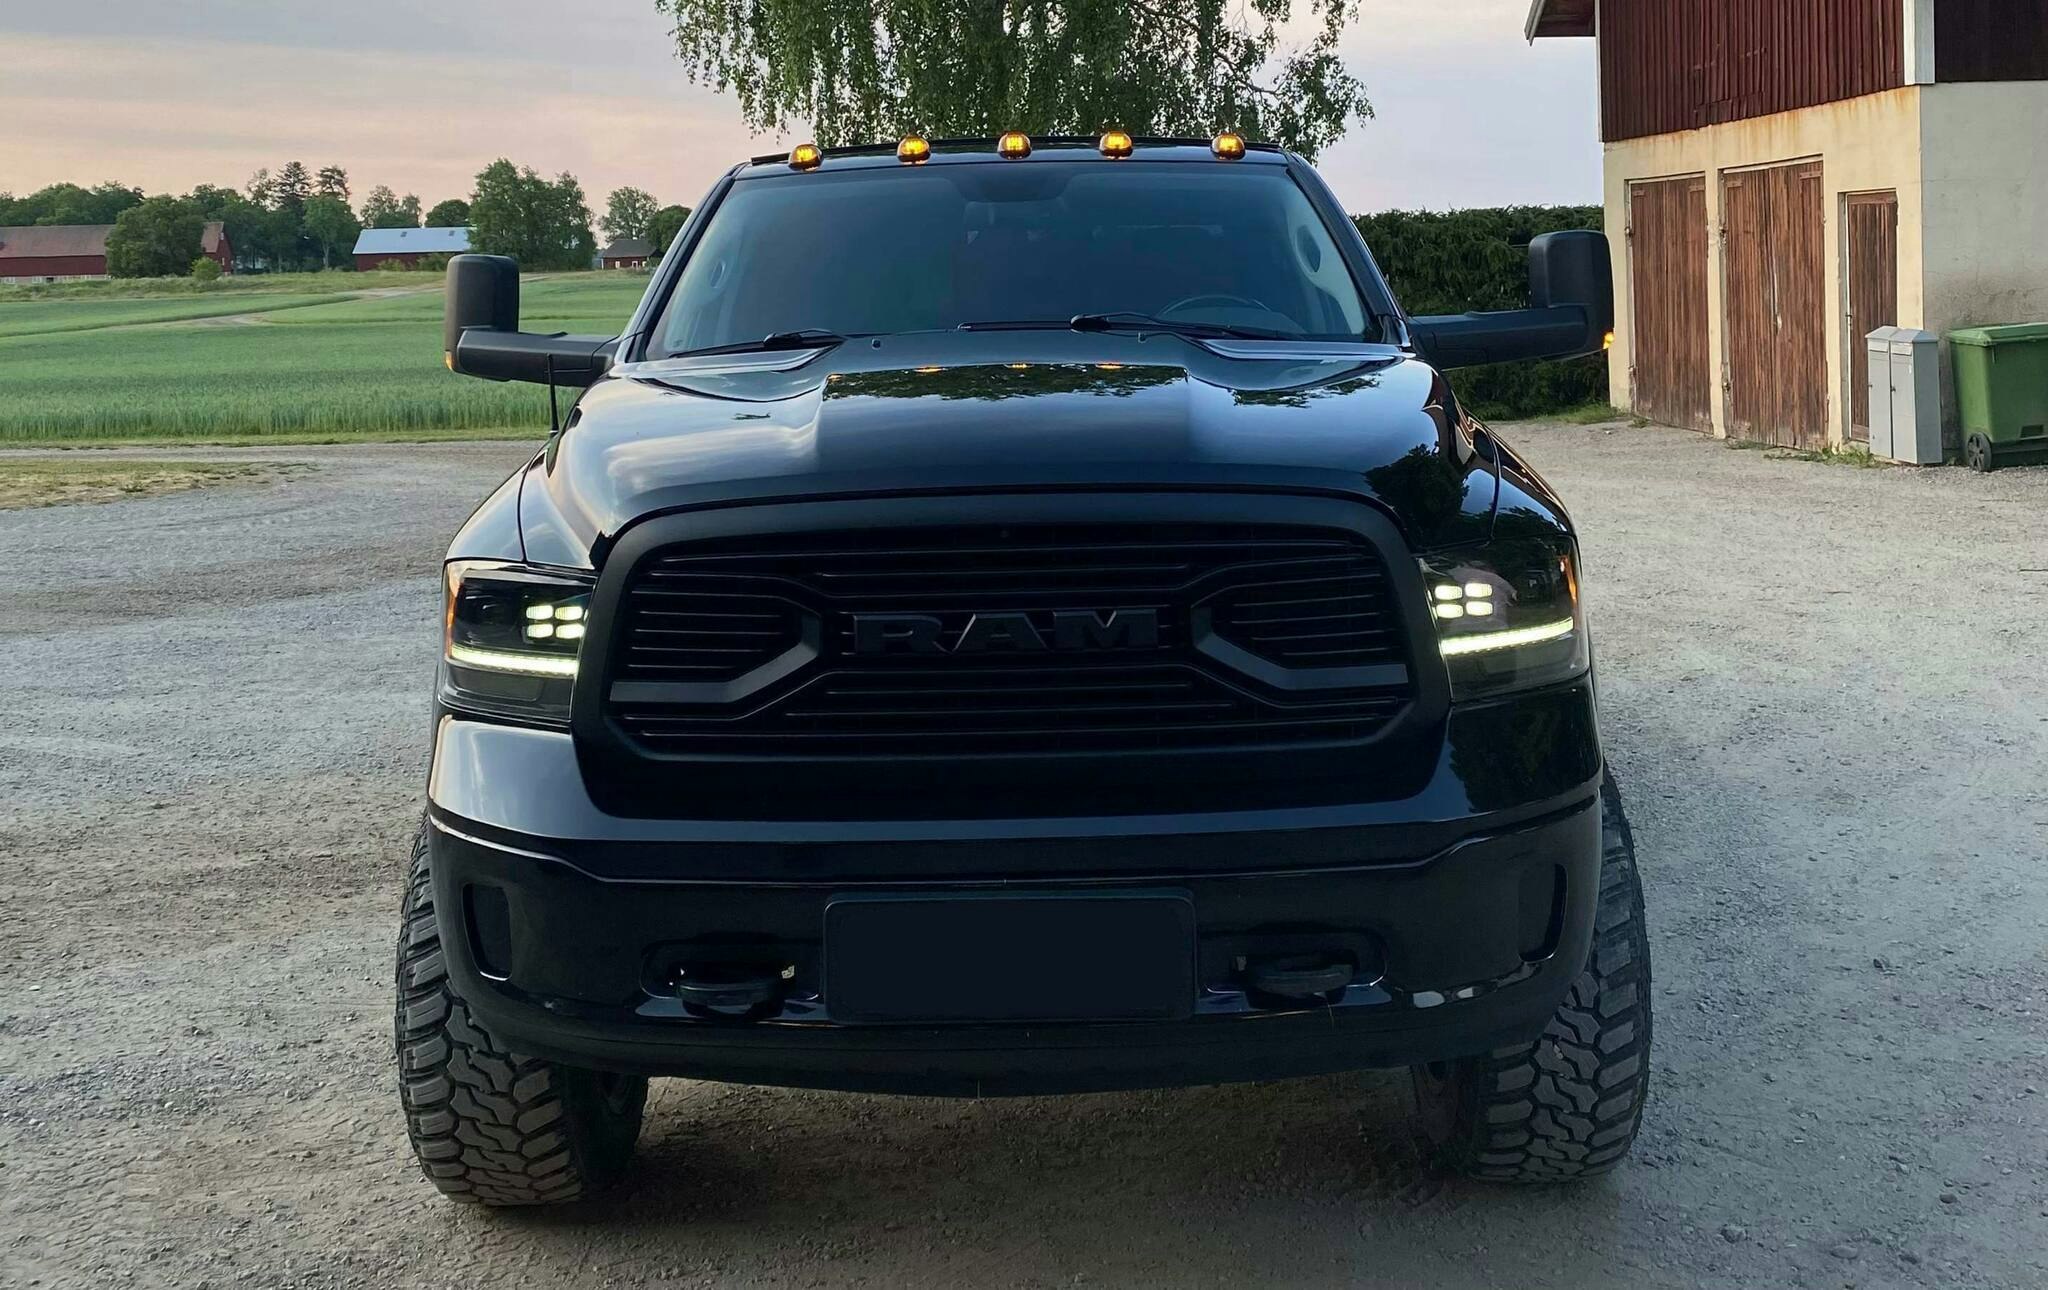 RAM 1500 13-18 Limited Grill